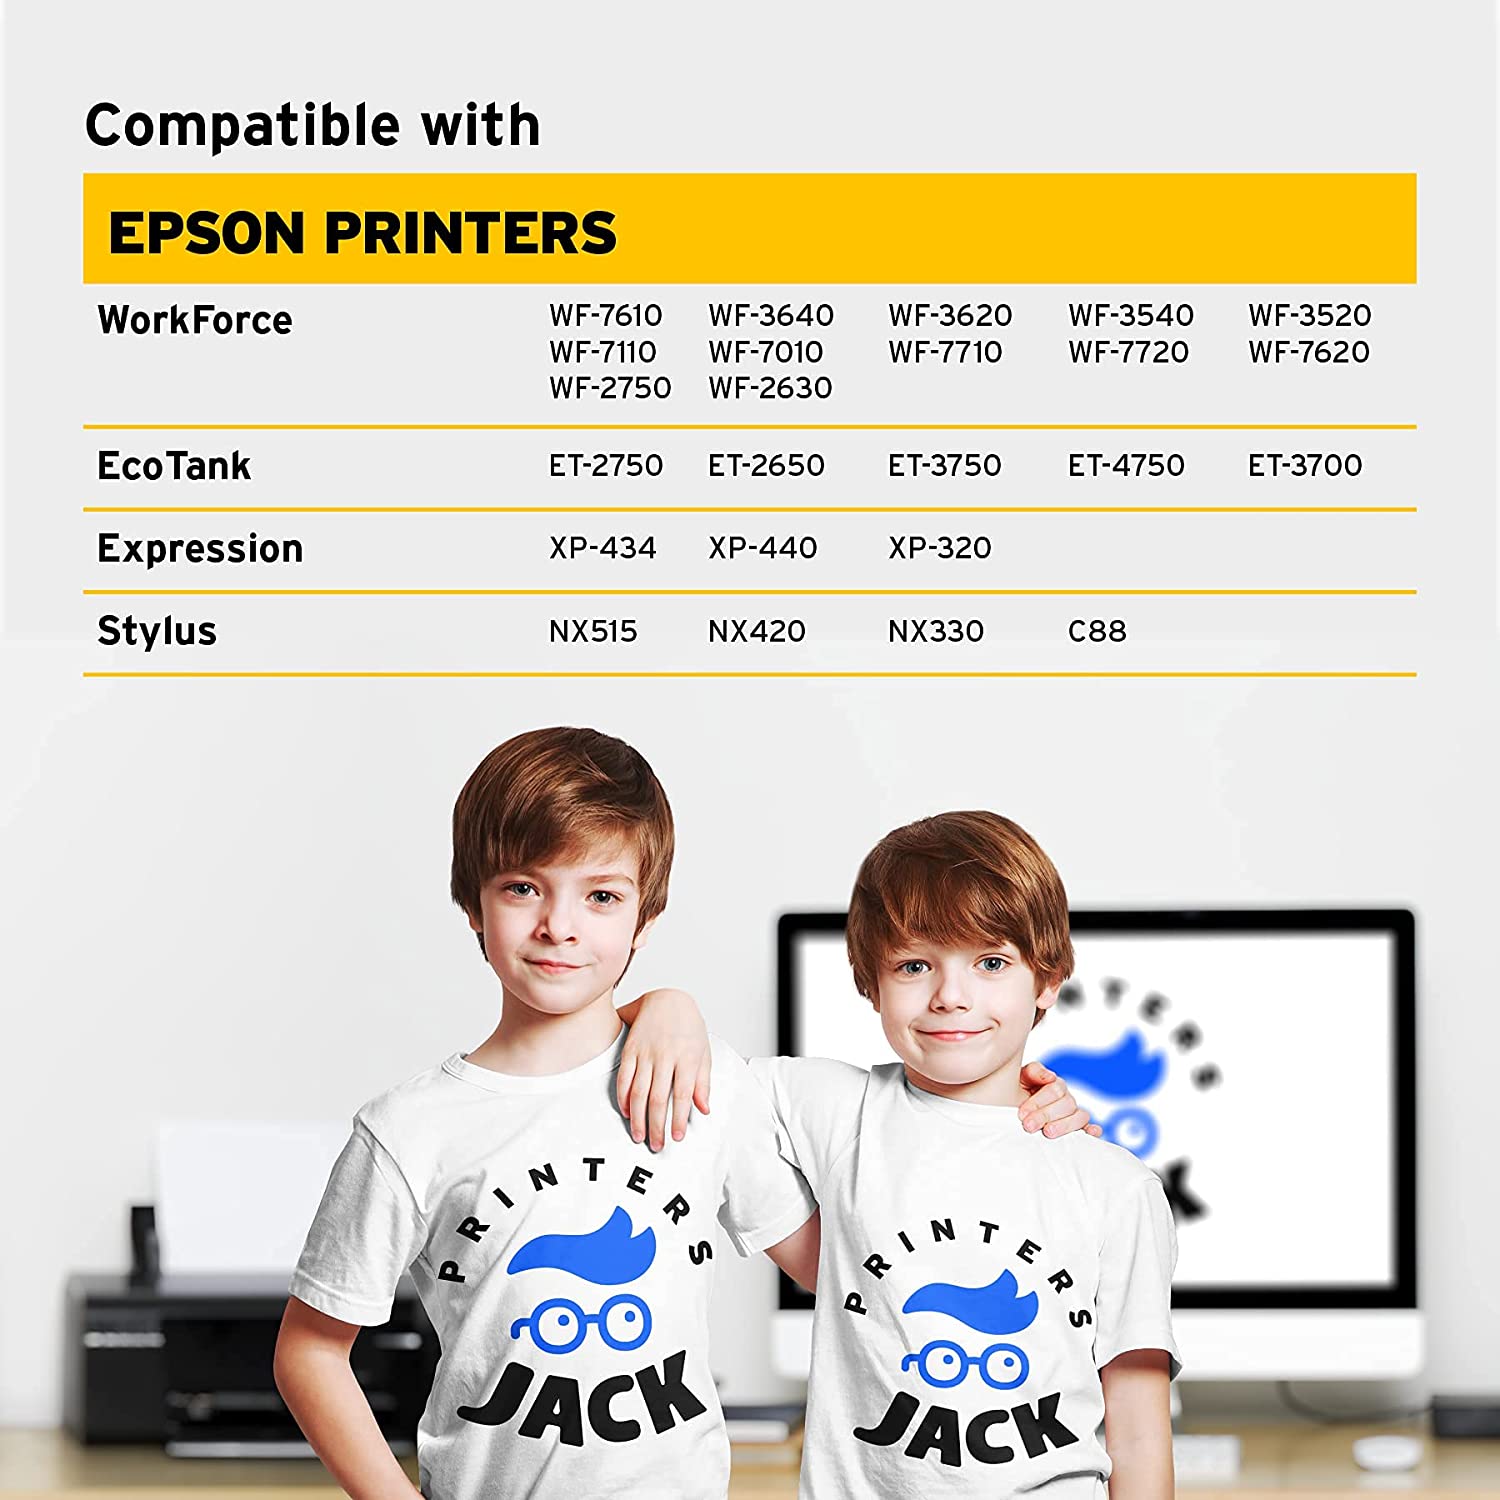 Printers Jack Save 8% for Anti UV Sublimation Ink + 11 x 17 Sublimation  Paper